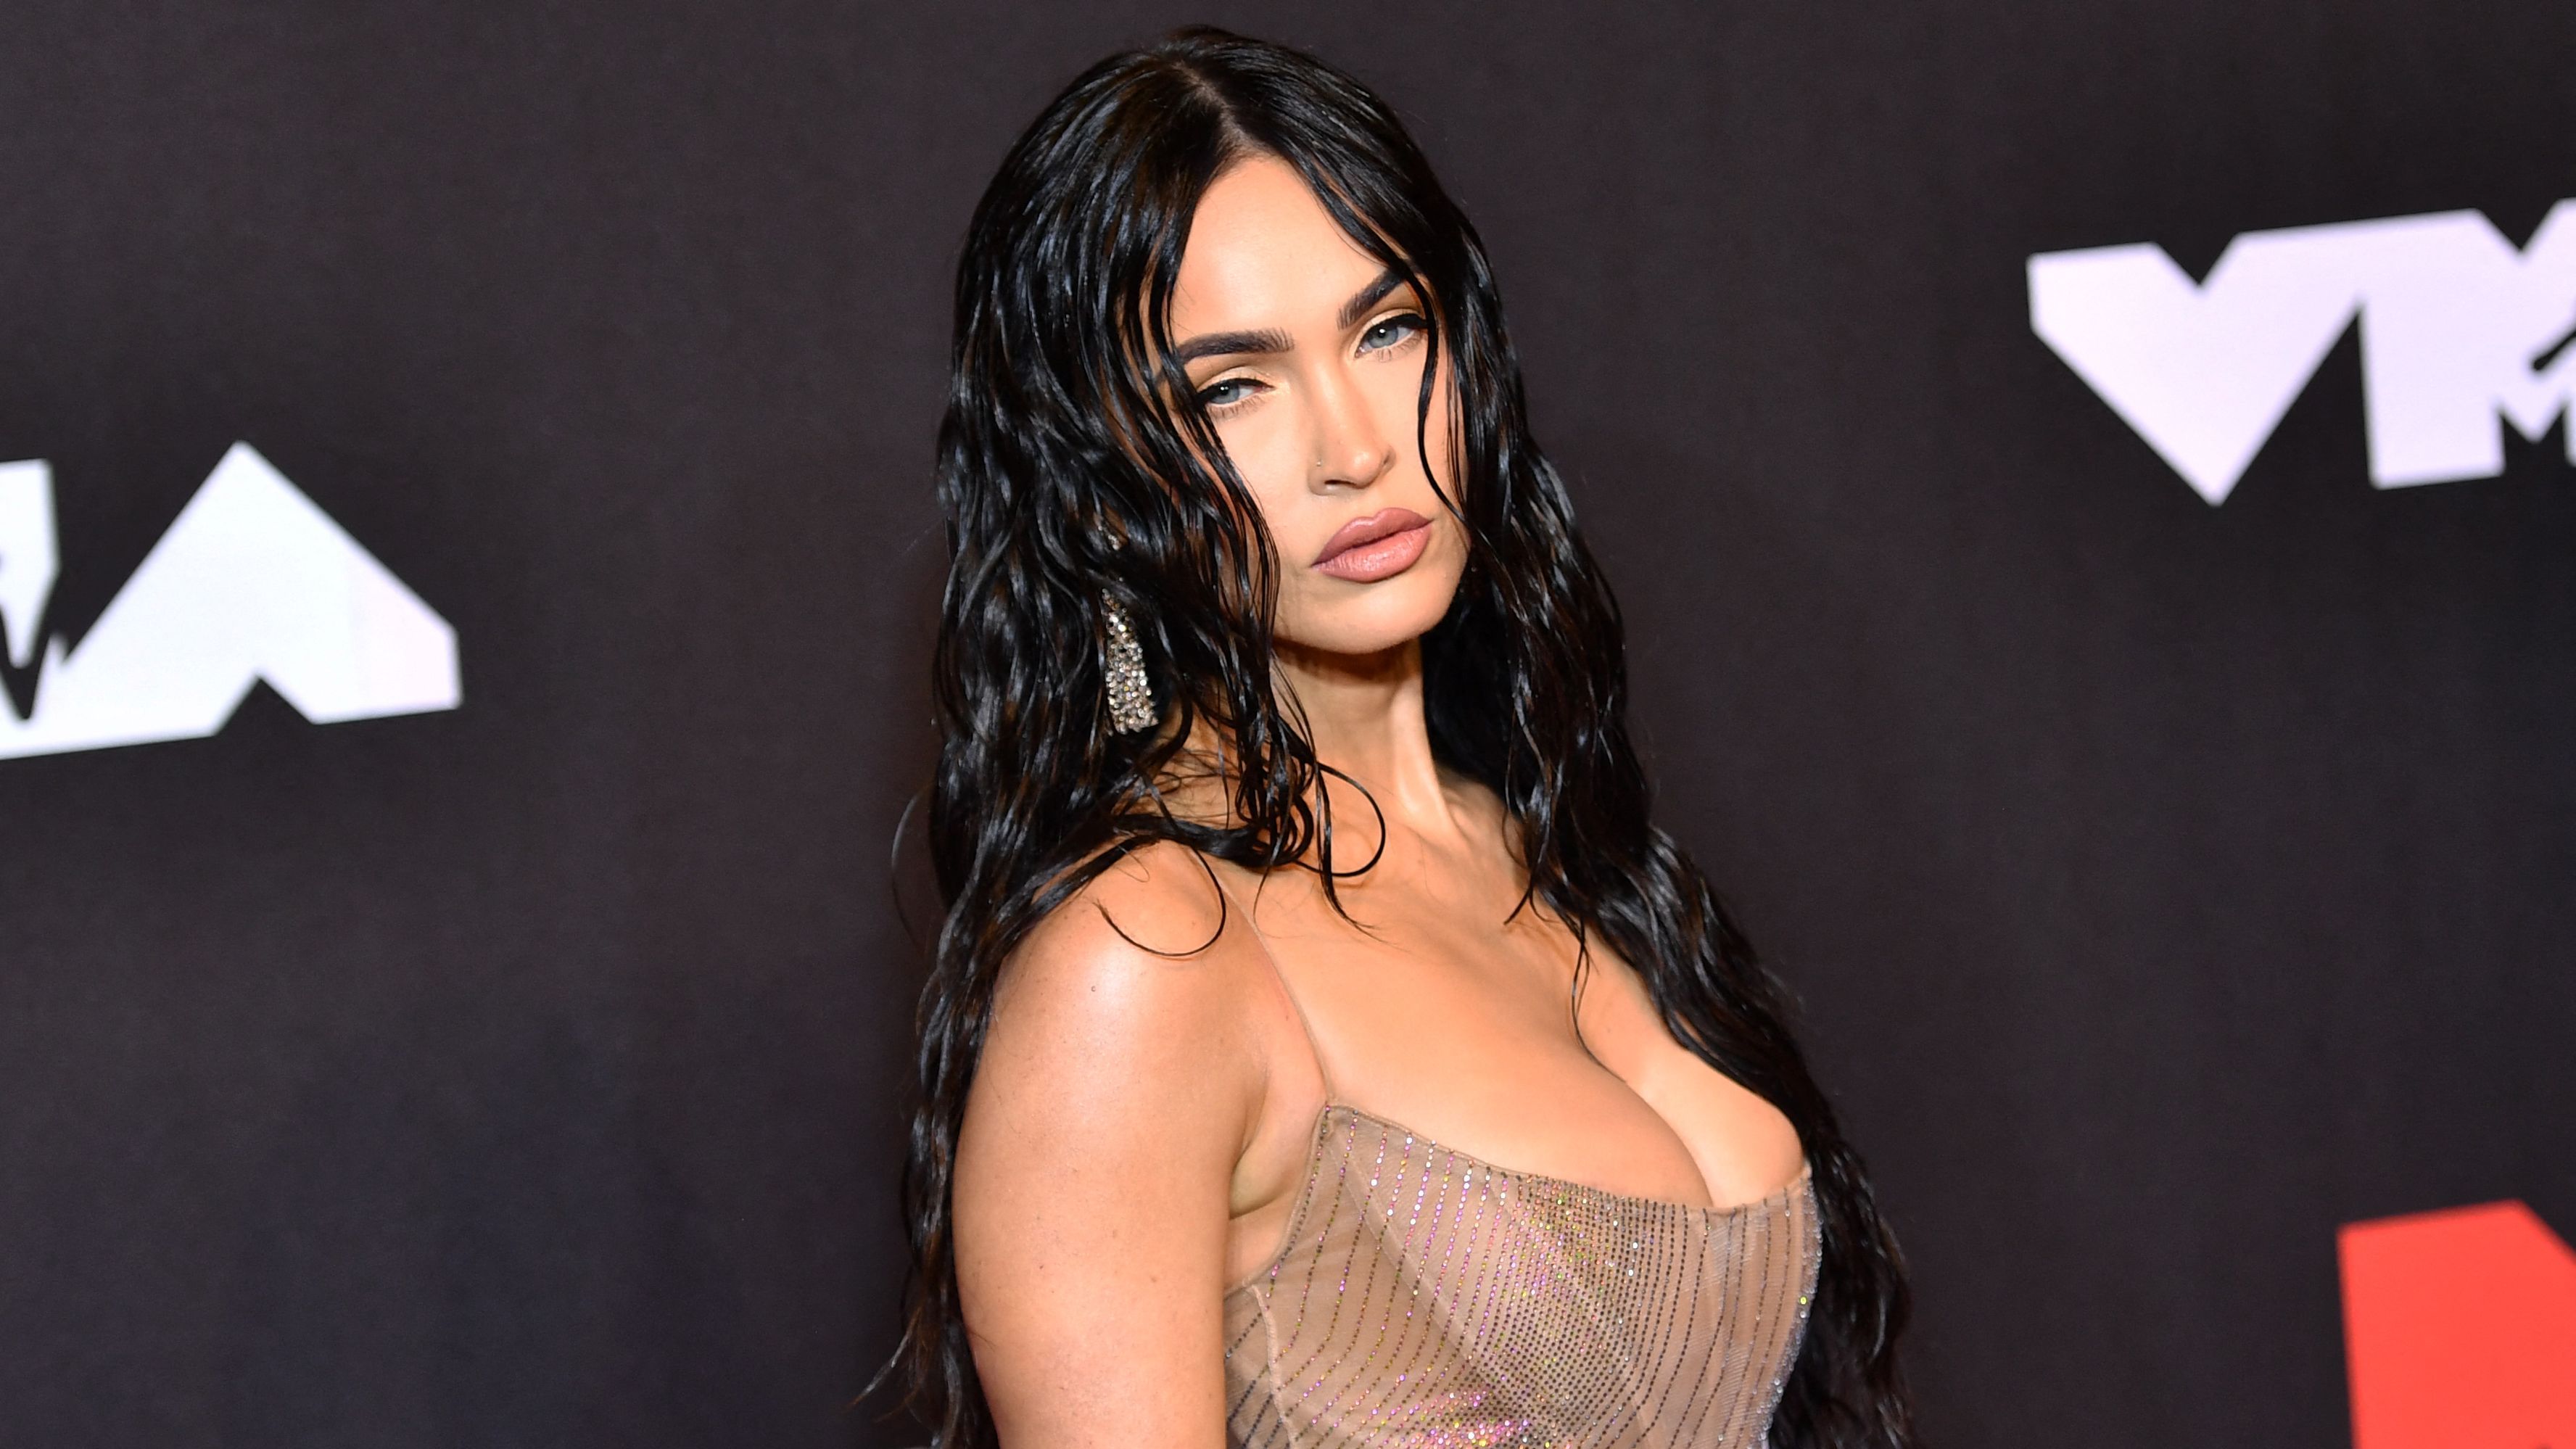 Megan Fox Wore a Completely Sheer Dress to the 2021 MTV VMAs